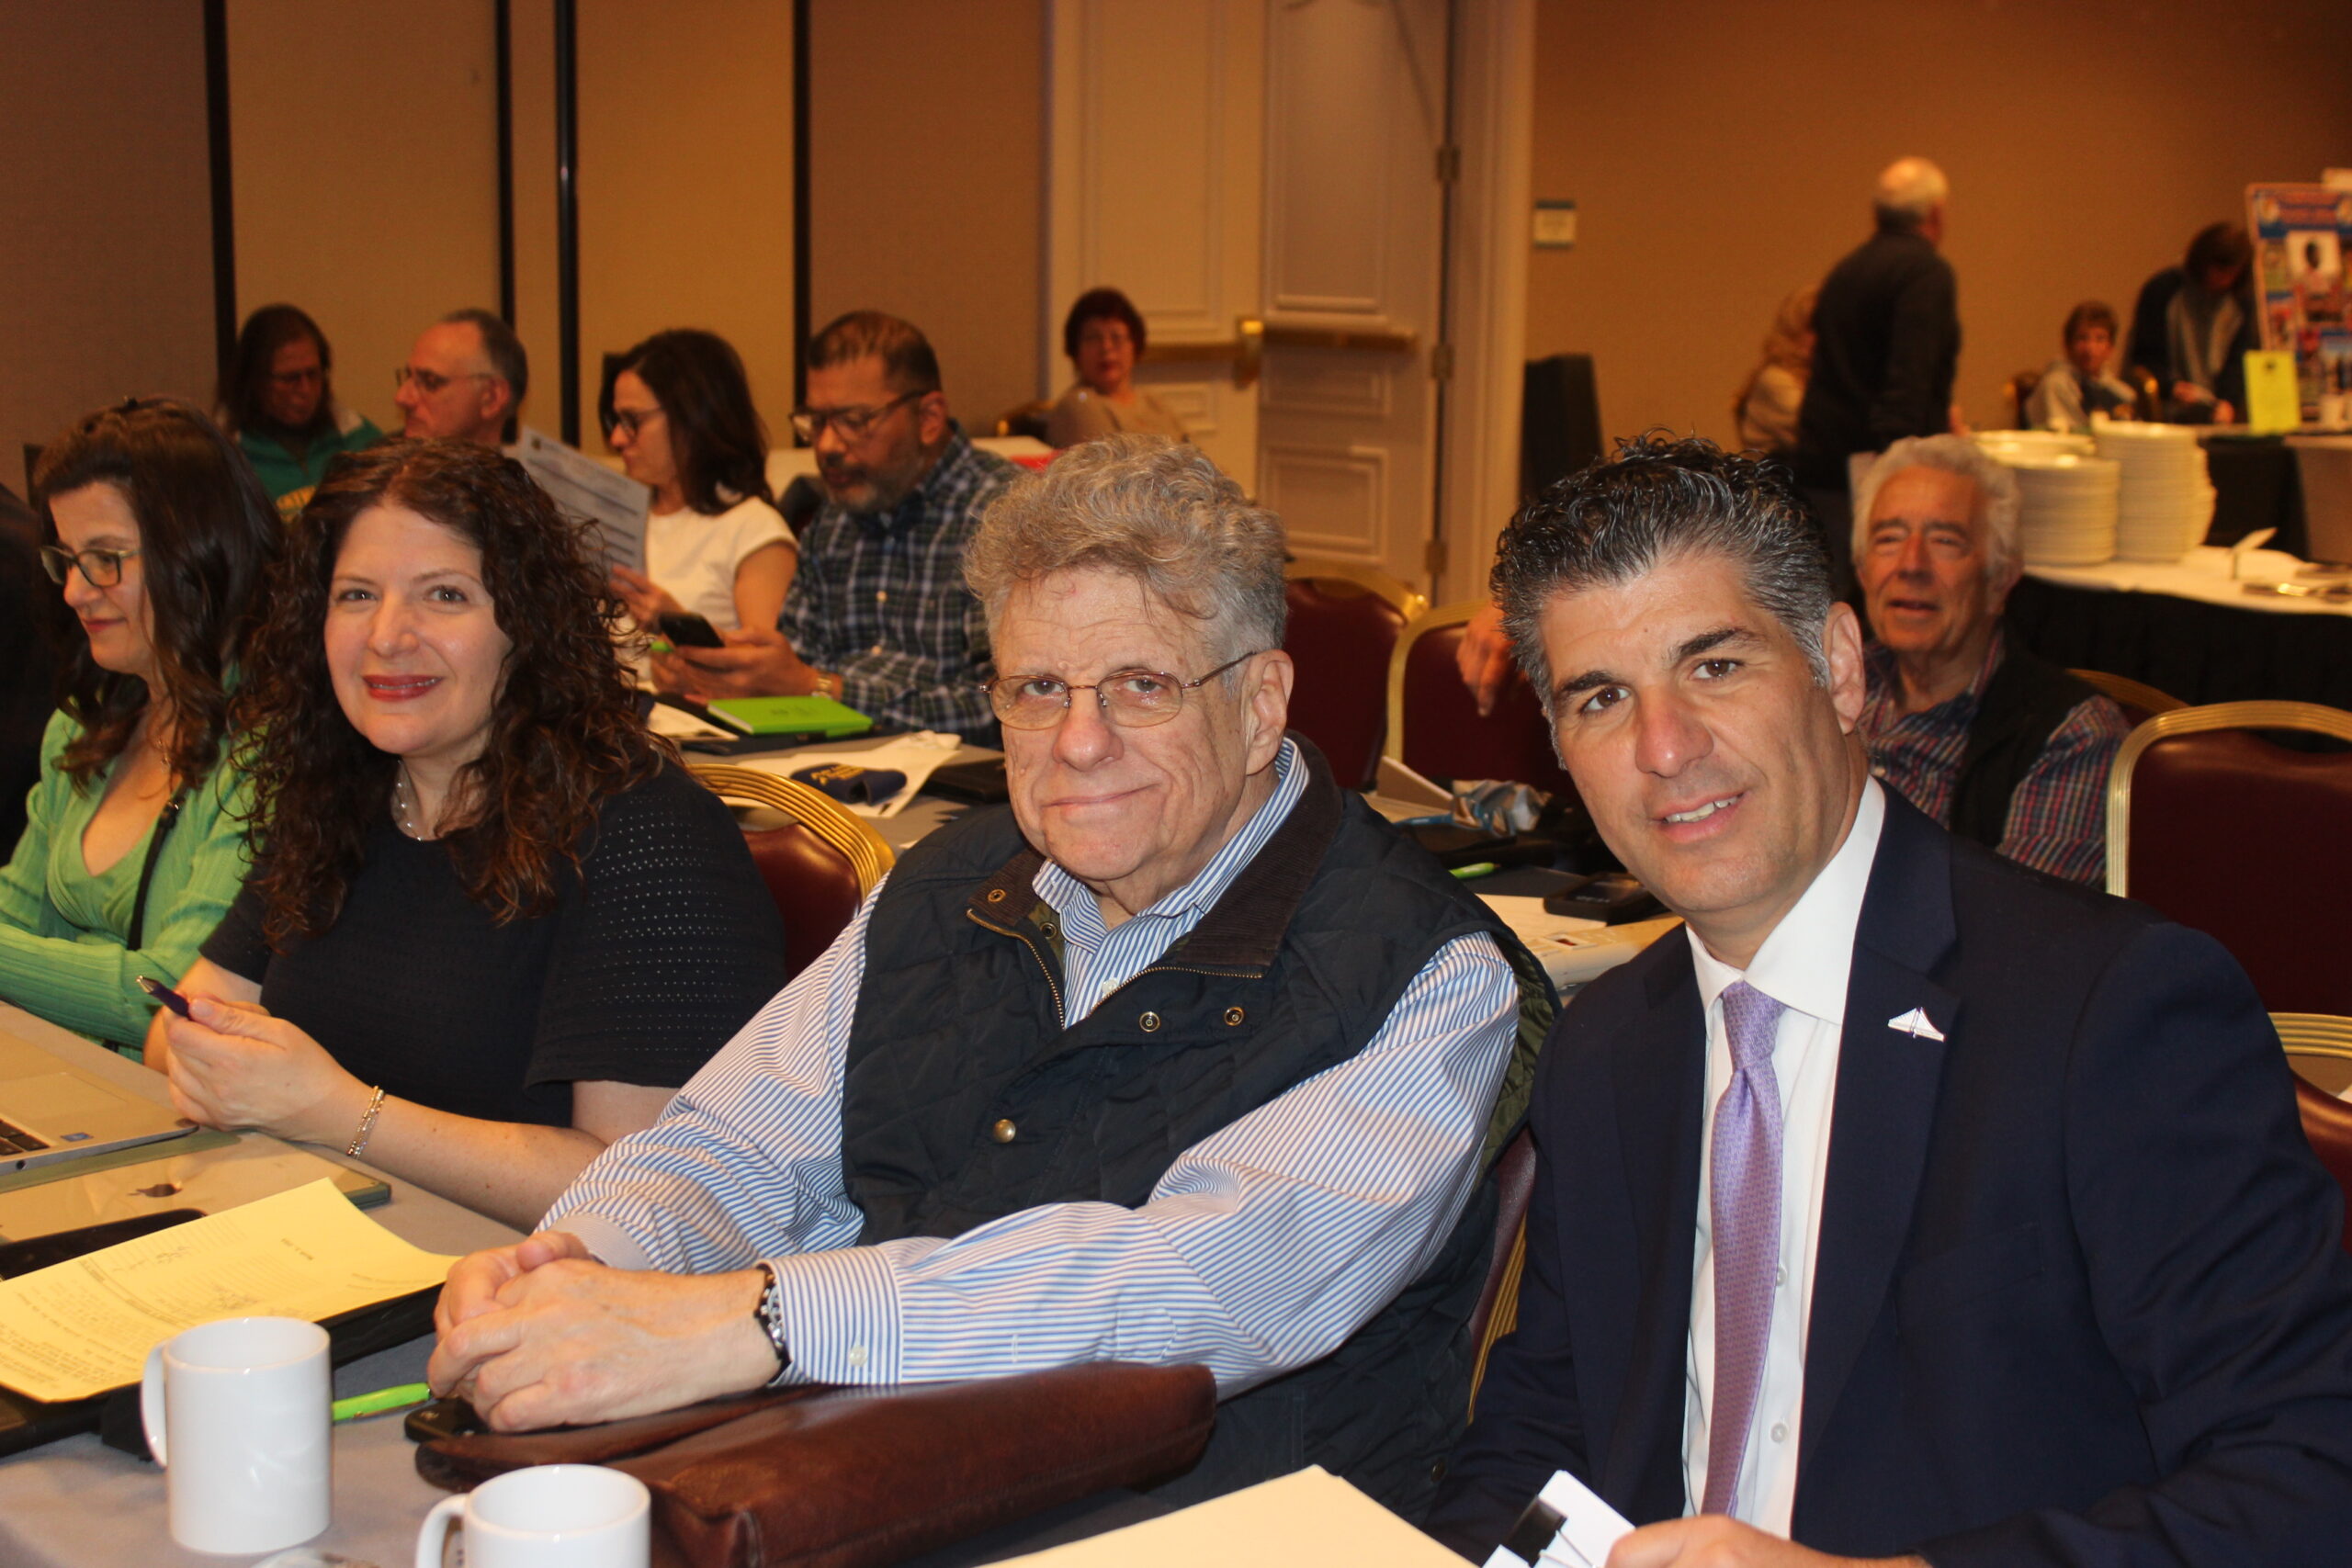 Dominic Famulari (right) with his father, John Famulari and sister, Gianna Famulari, at the Bay Ridge Lawyers Association’s annual Winter Seminar in Atlantic City.Brooklyn Eagle photos by Mario Belluomo